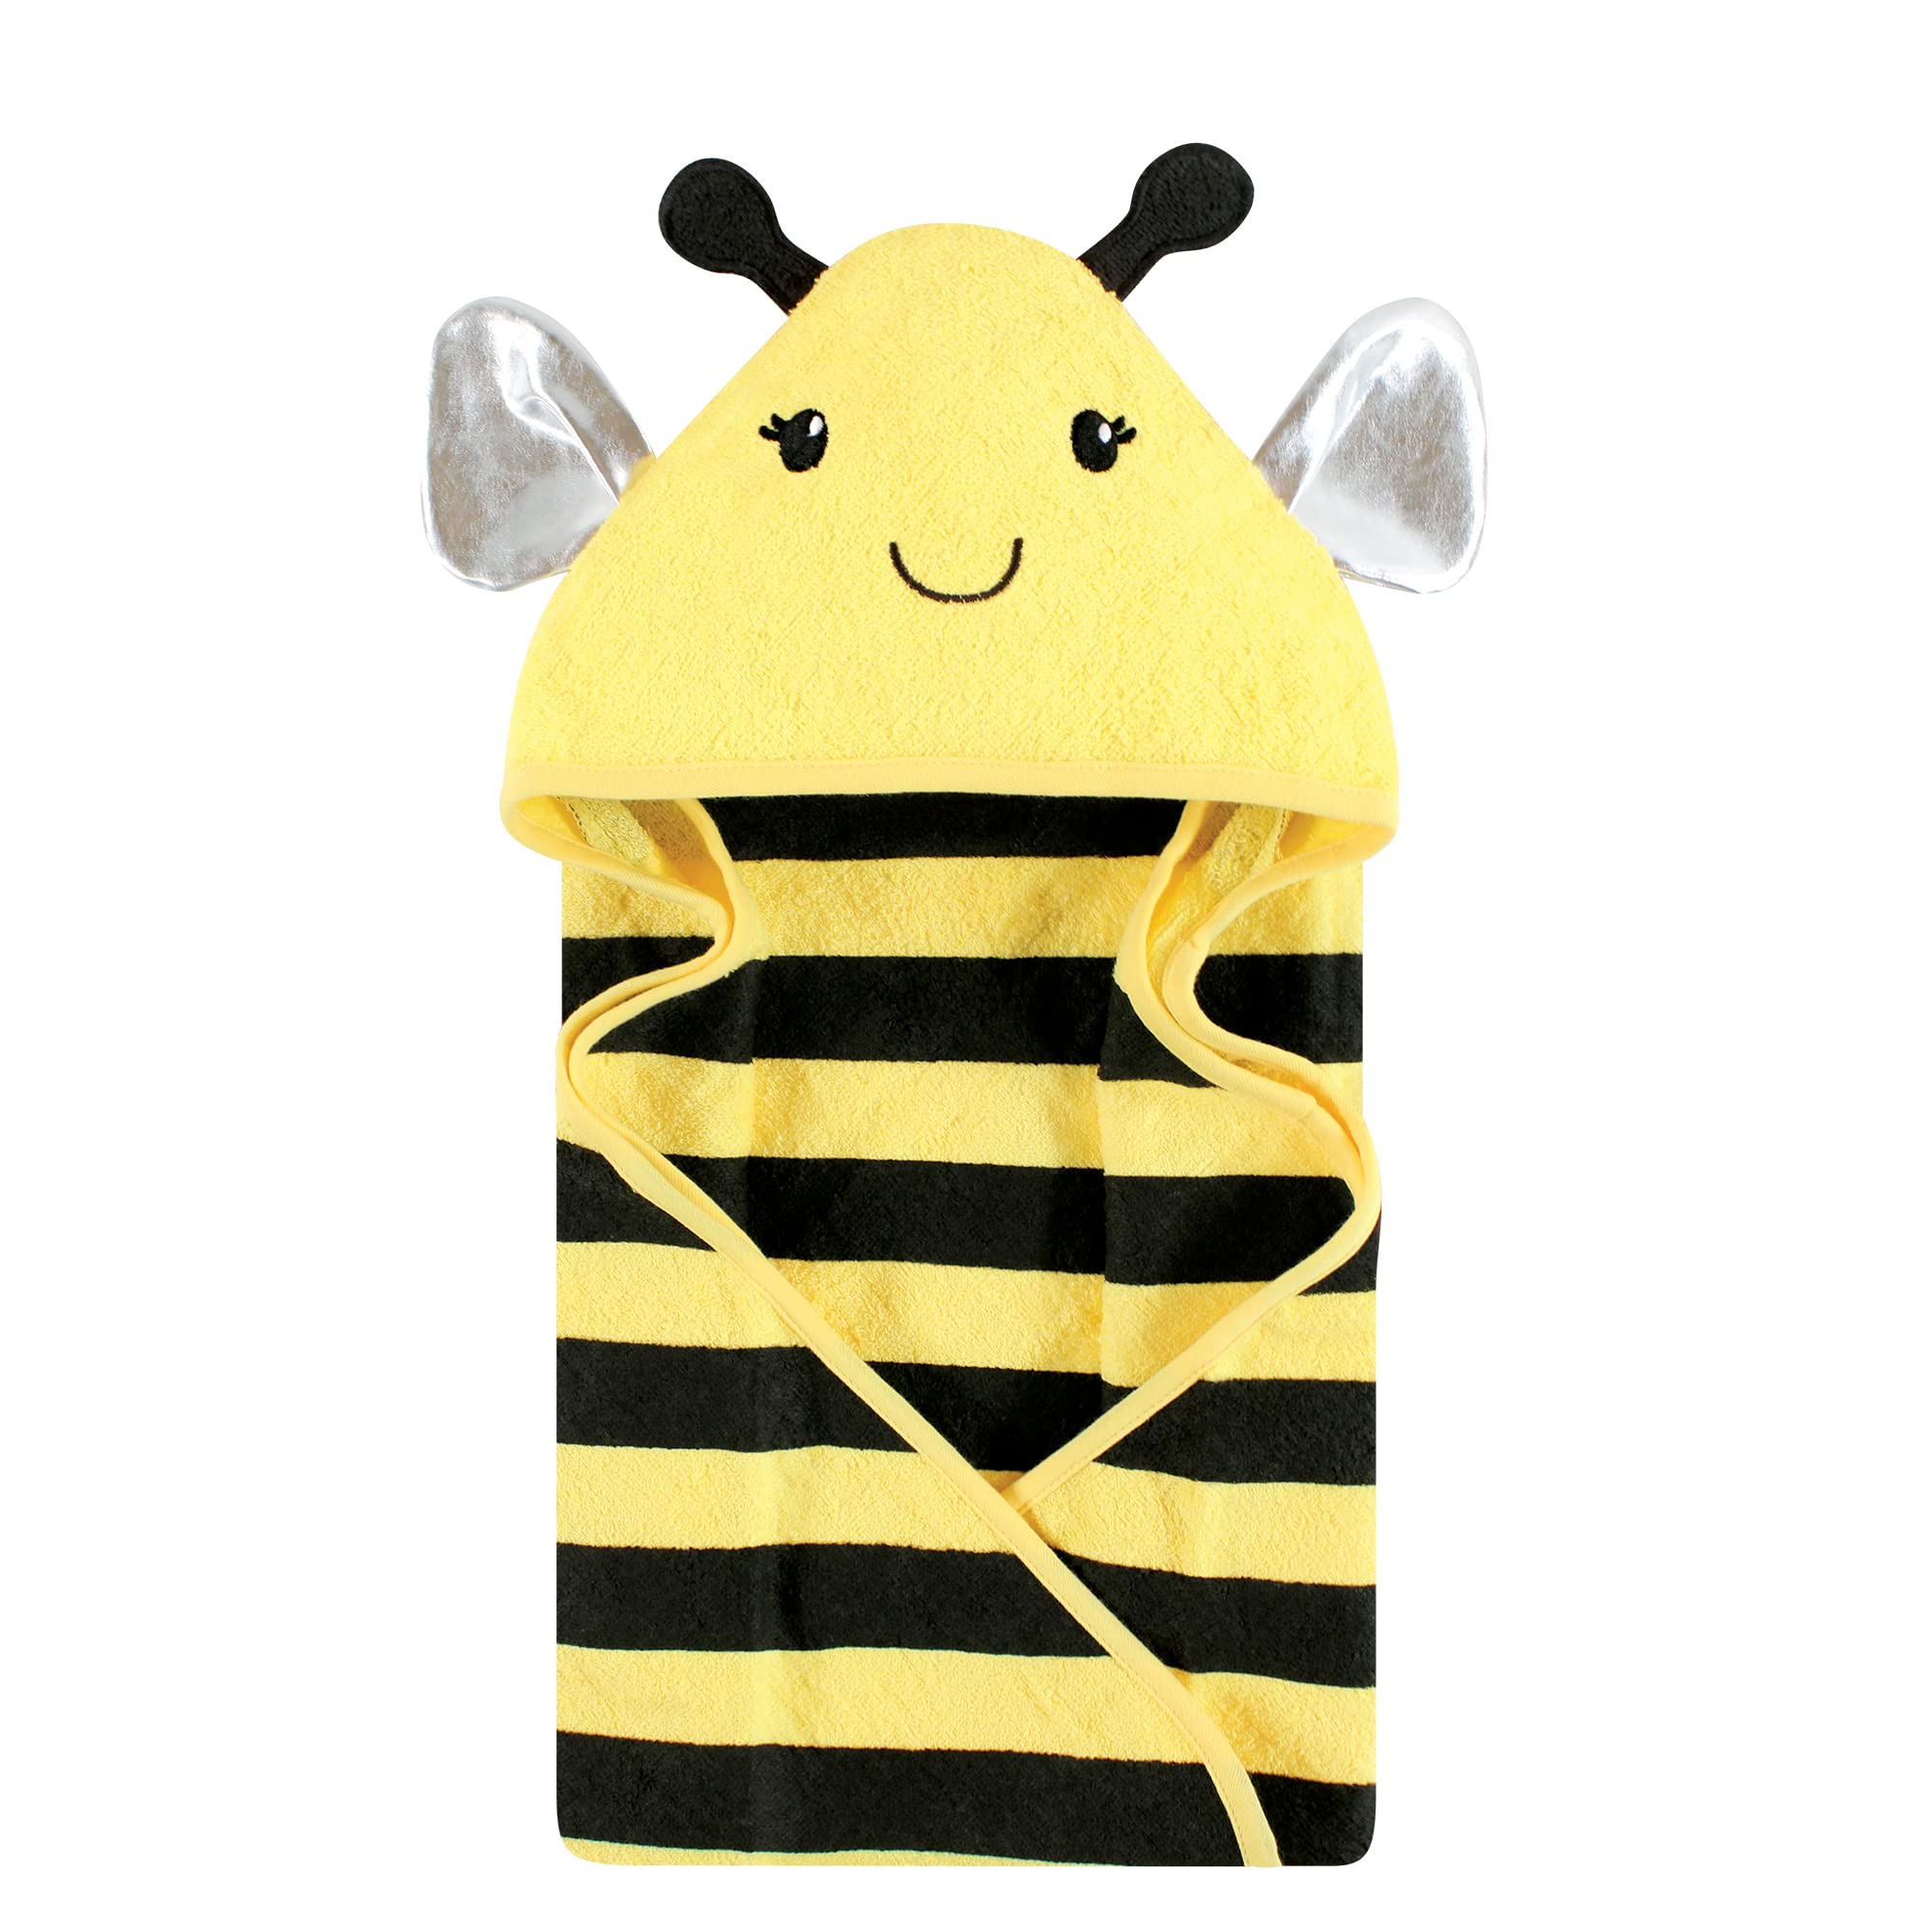 Hudson Baby Unisex Baby Cotton Animal Face Hooded Towel, Yellow Bee, One Size